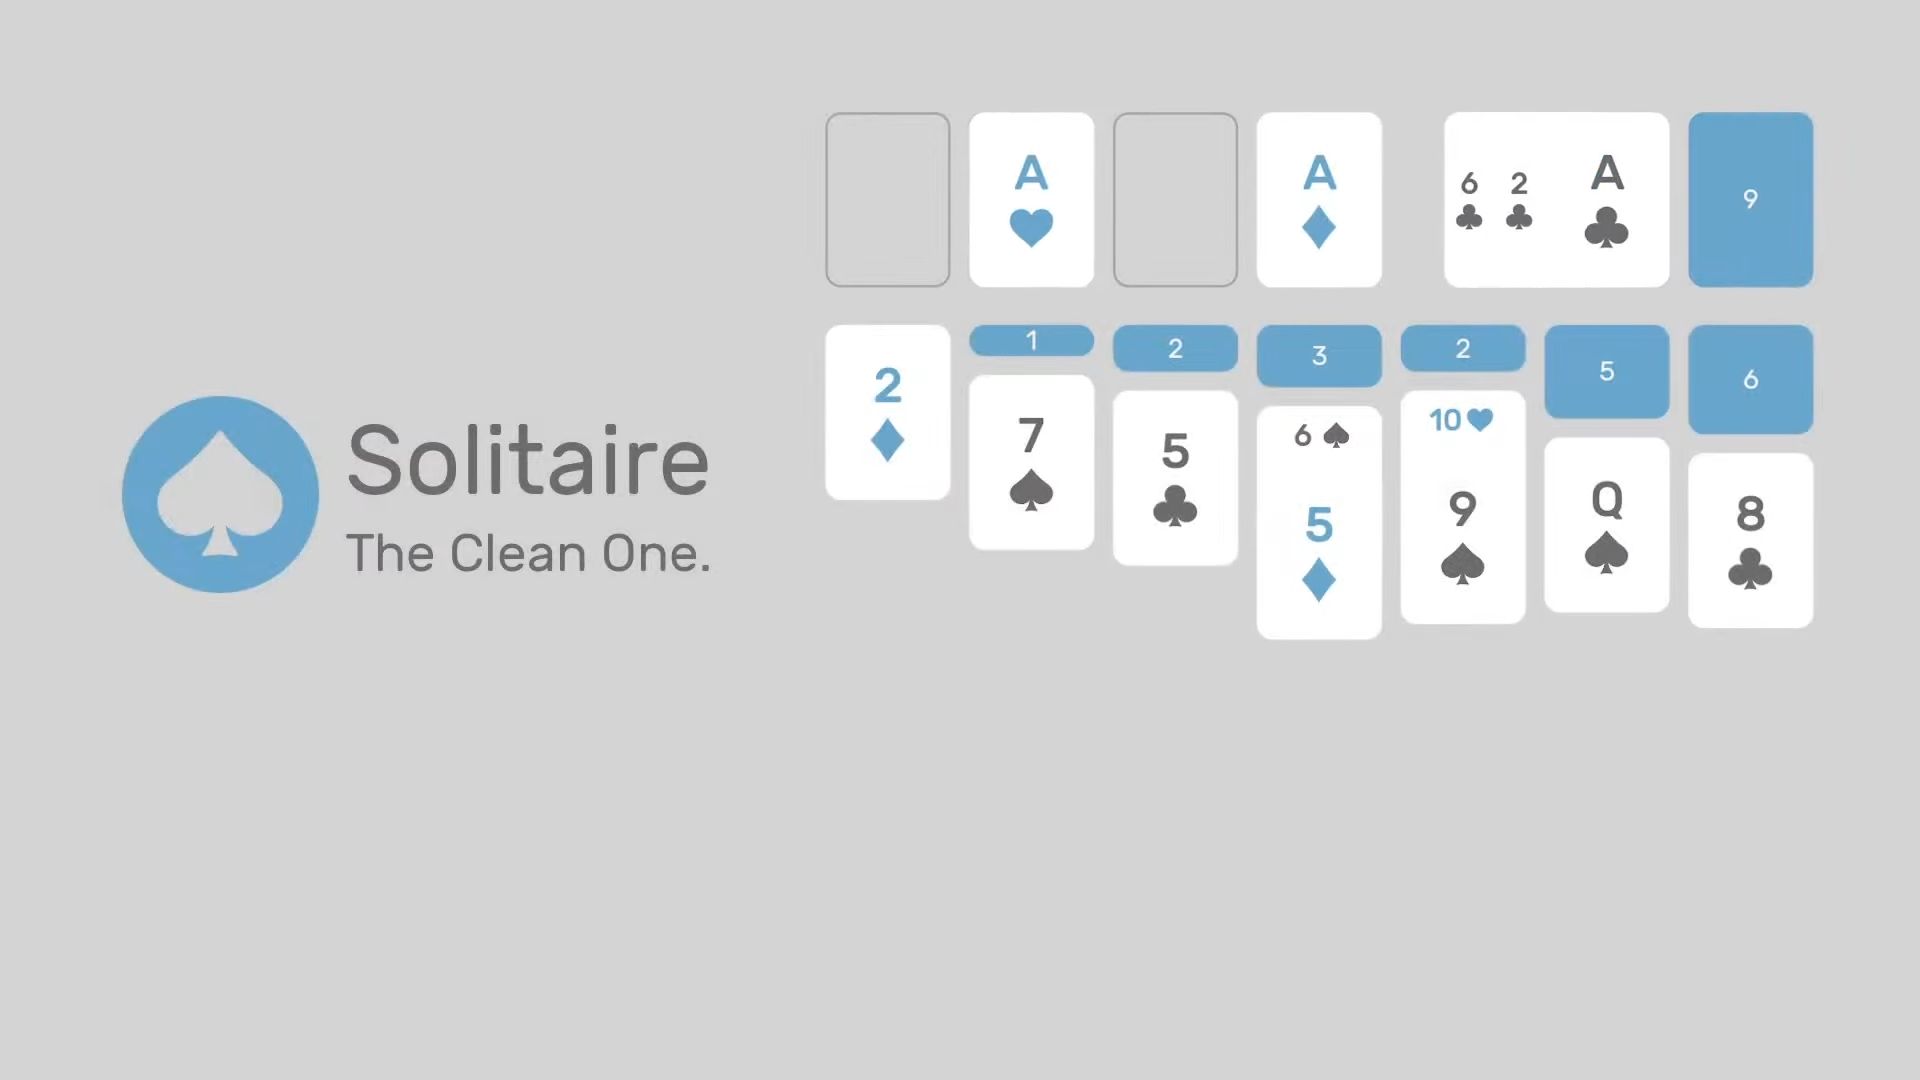 Solitaire - The Clean One